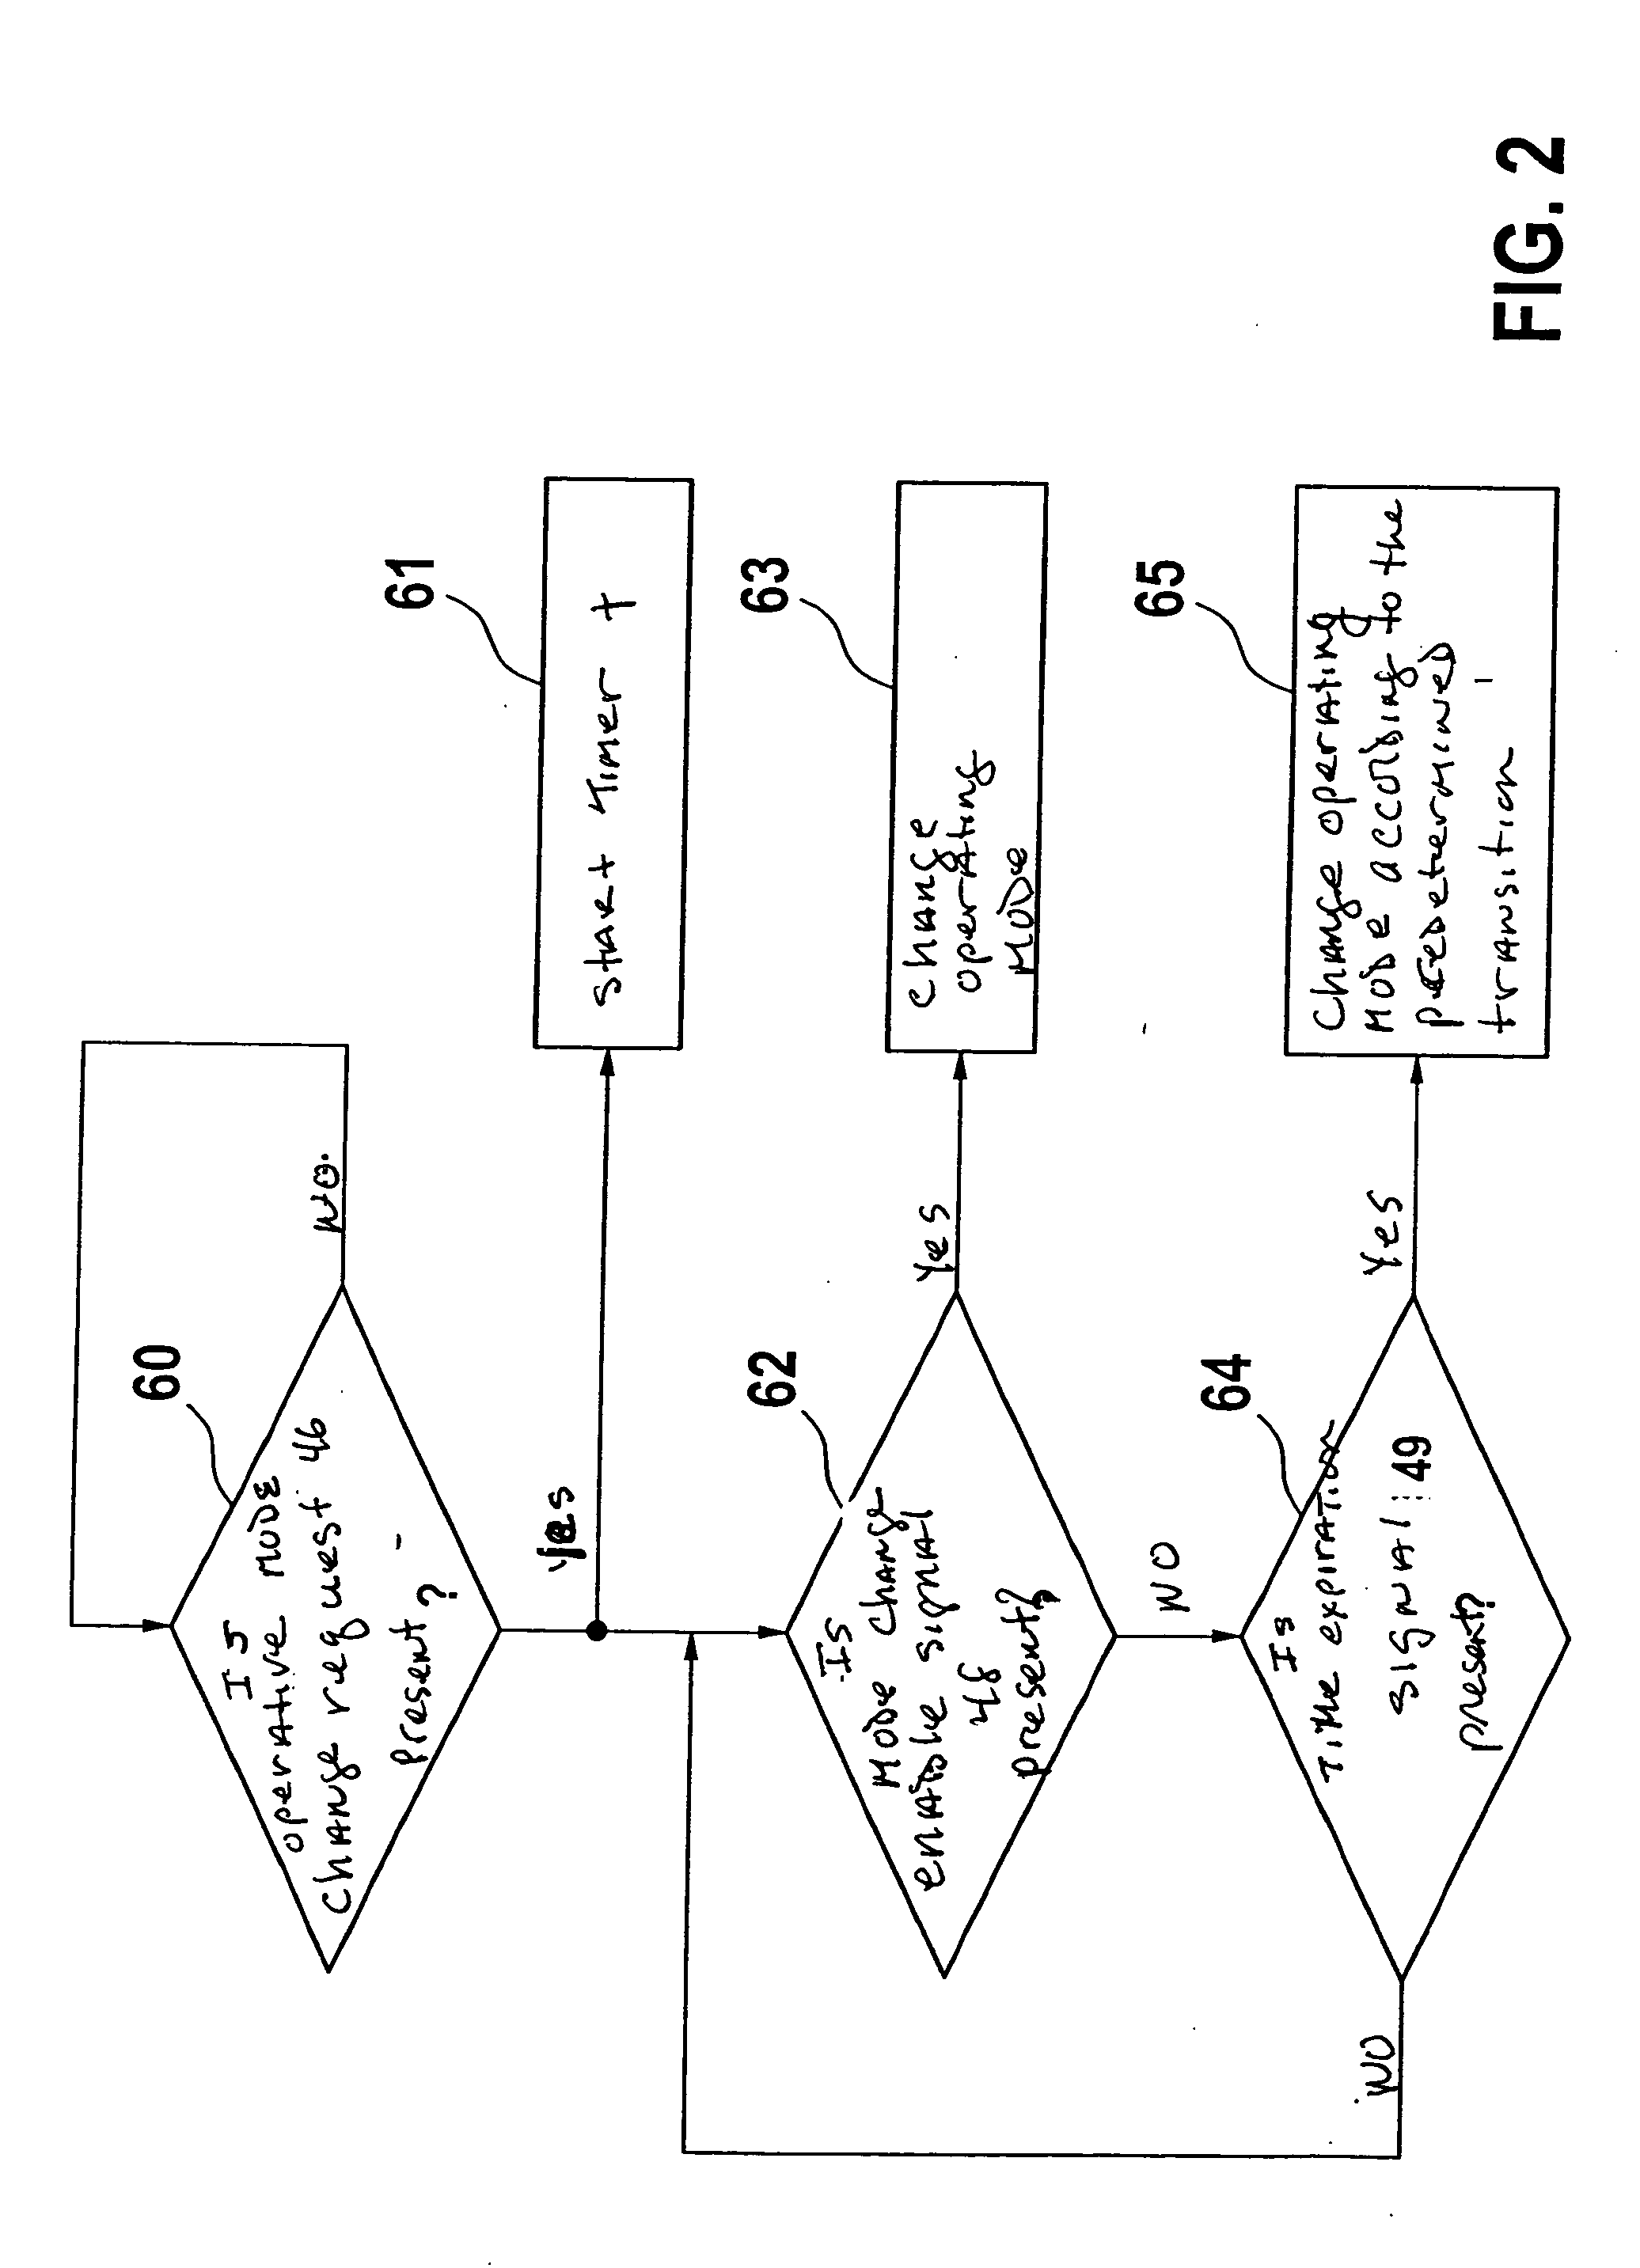 Method for operating an axhaust gas treatment device